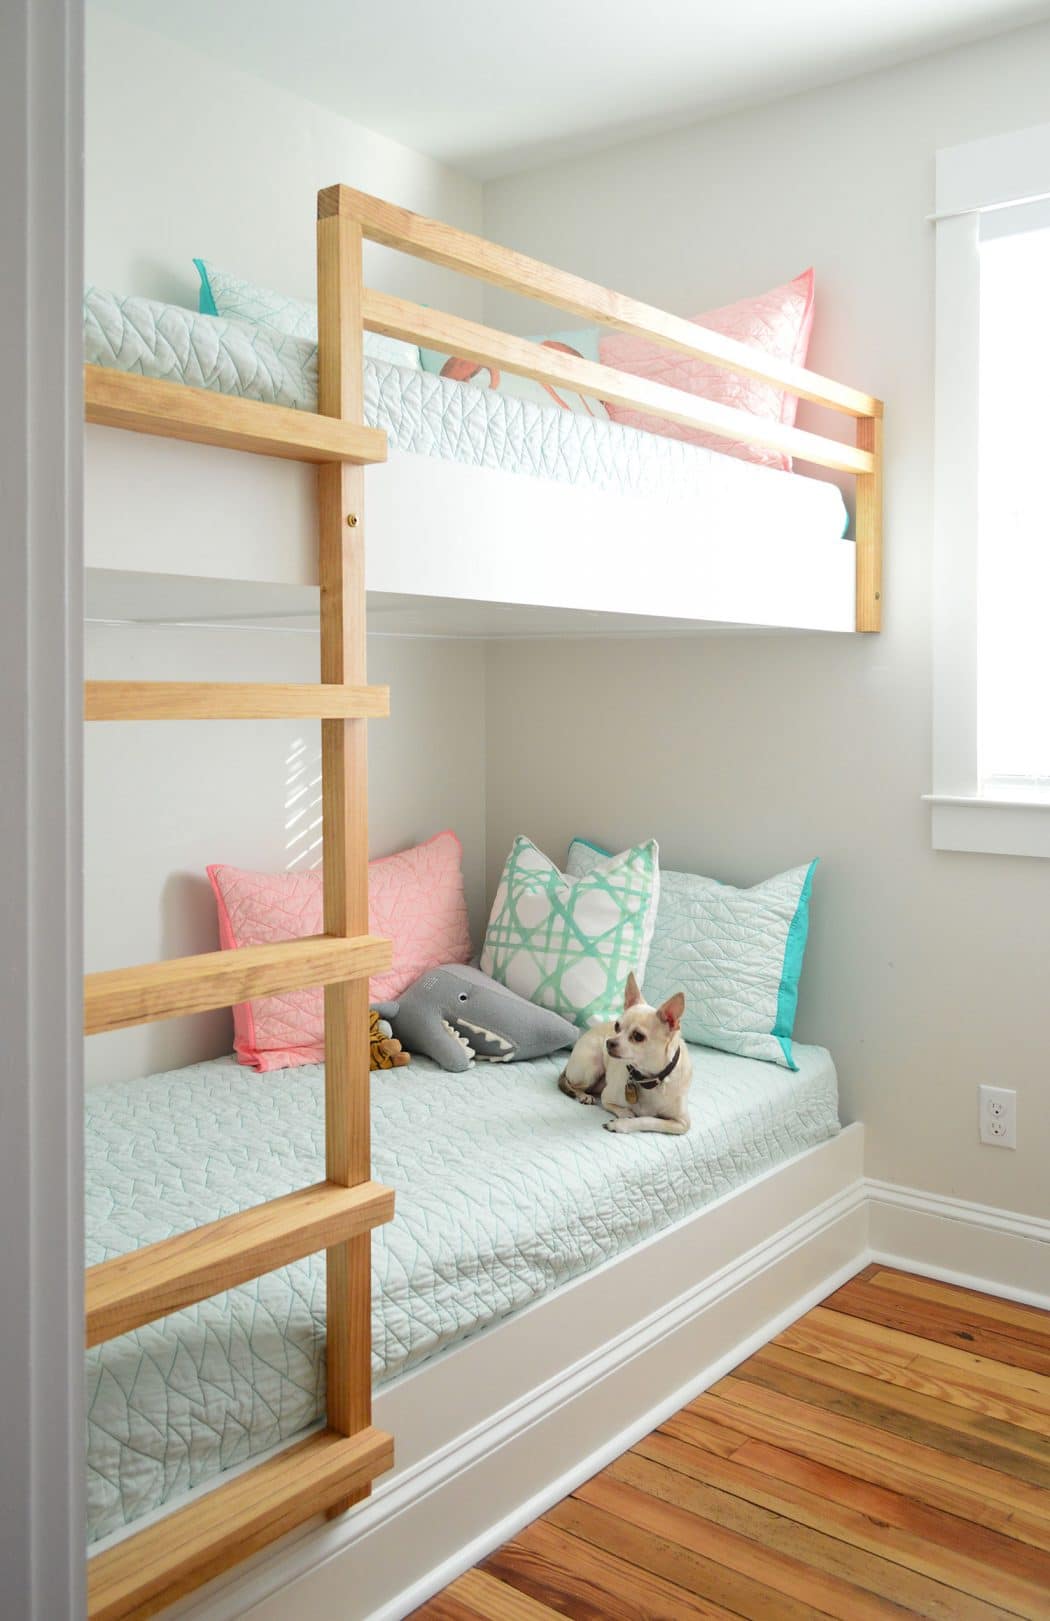 bunk beds built into the wall